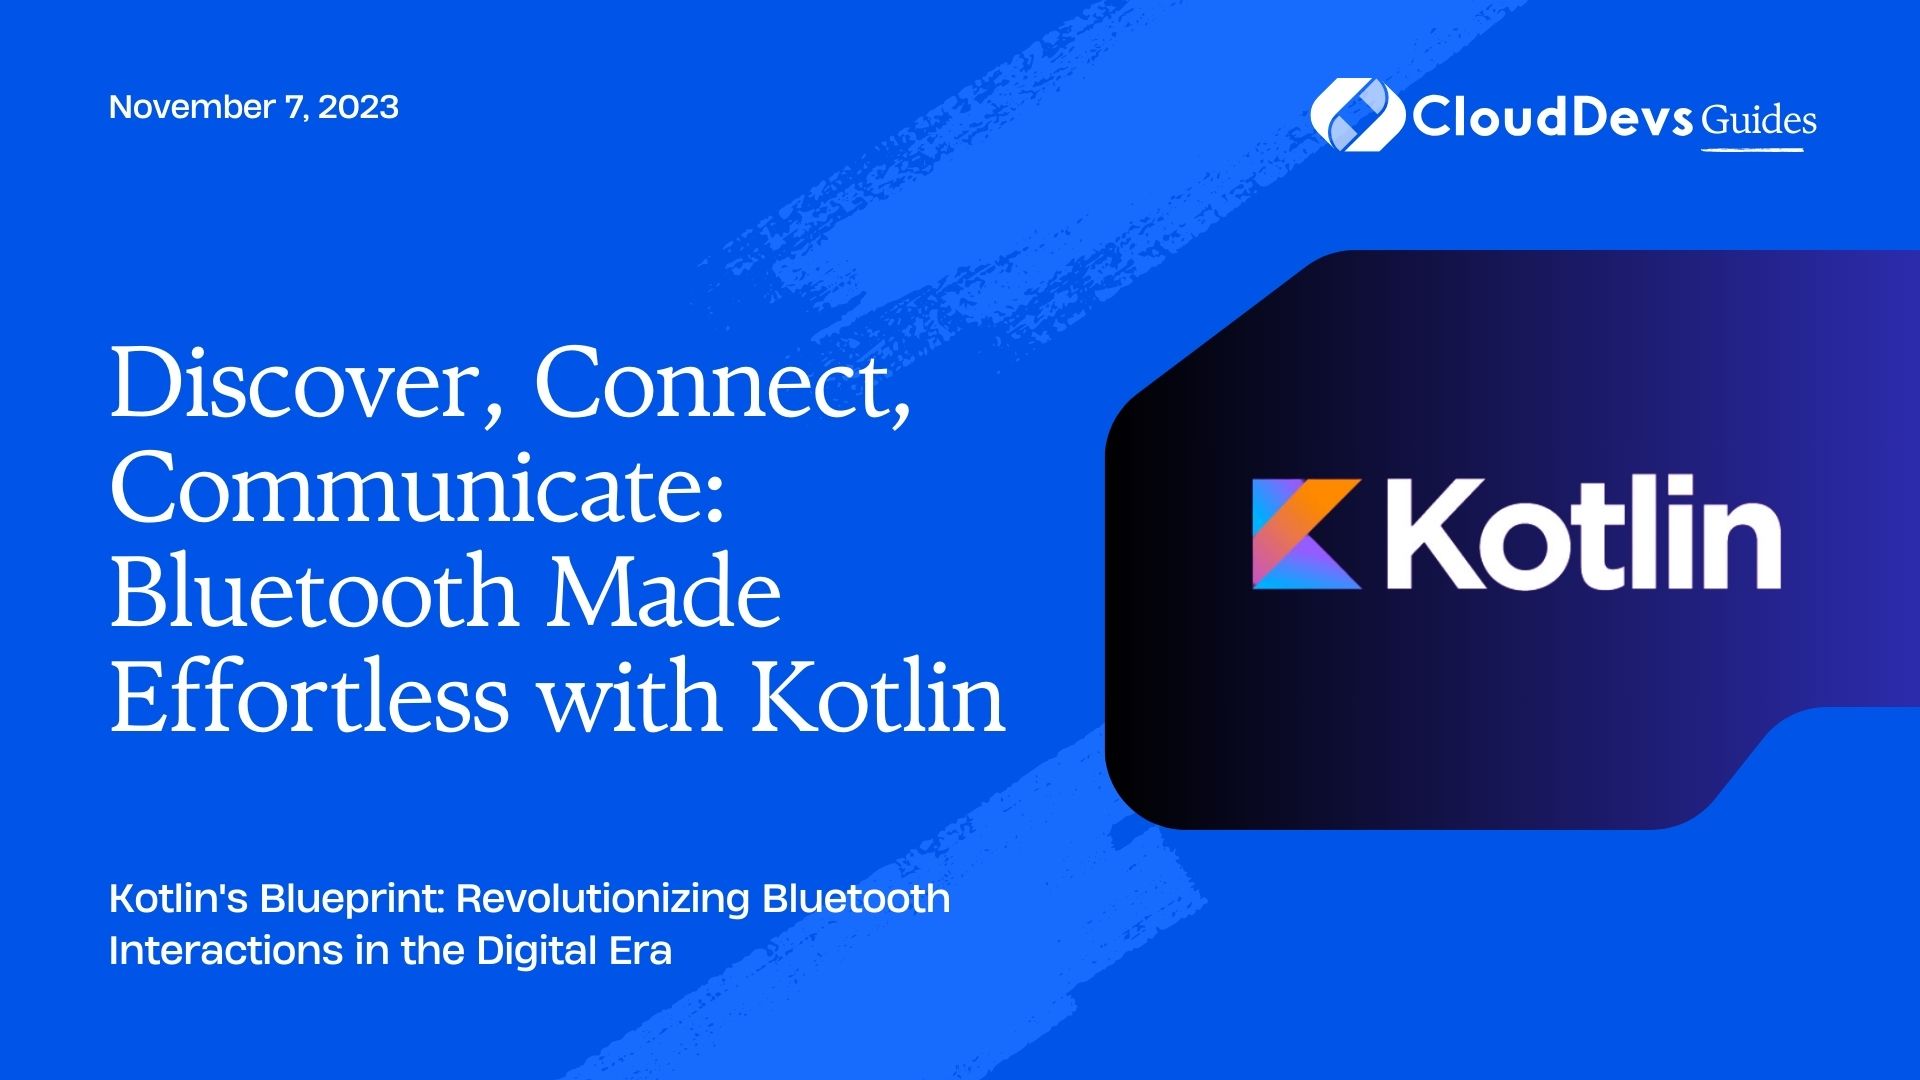 Discover, Connect, Communicate: Bluetooth Made Effortless with Kotlin